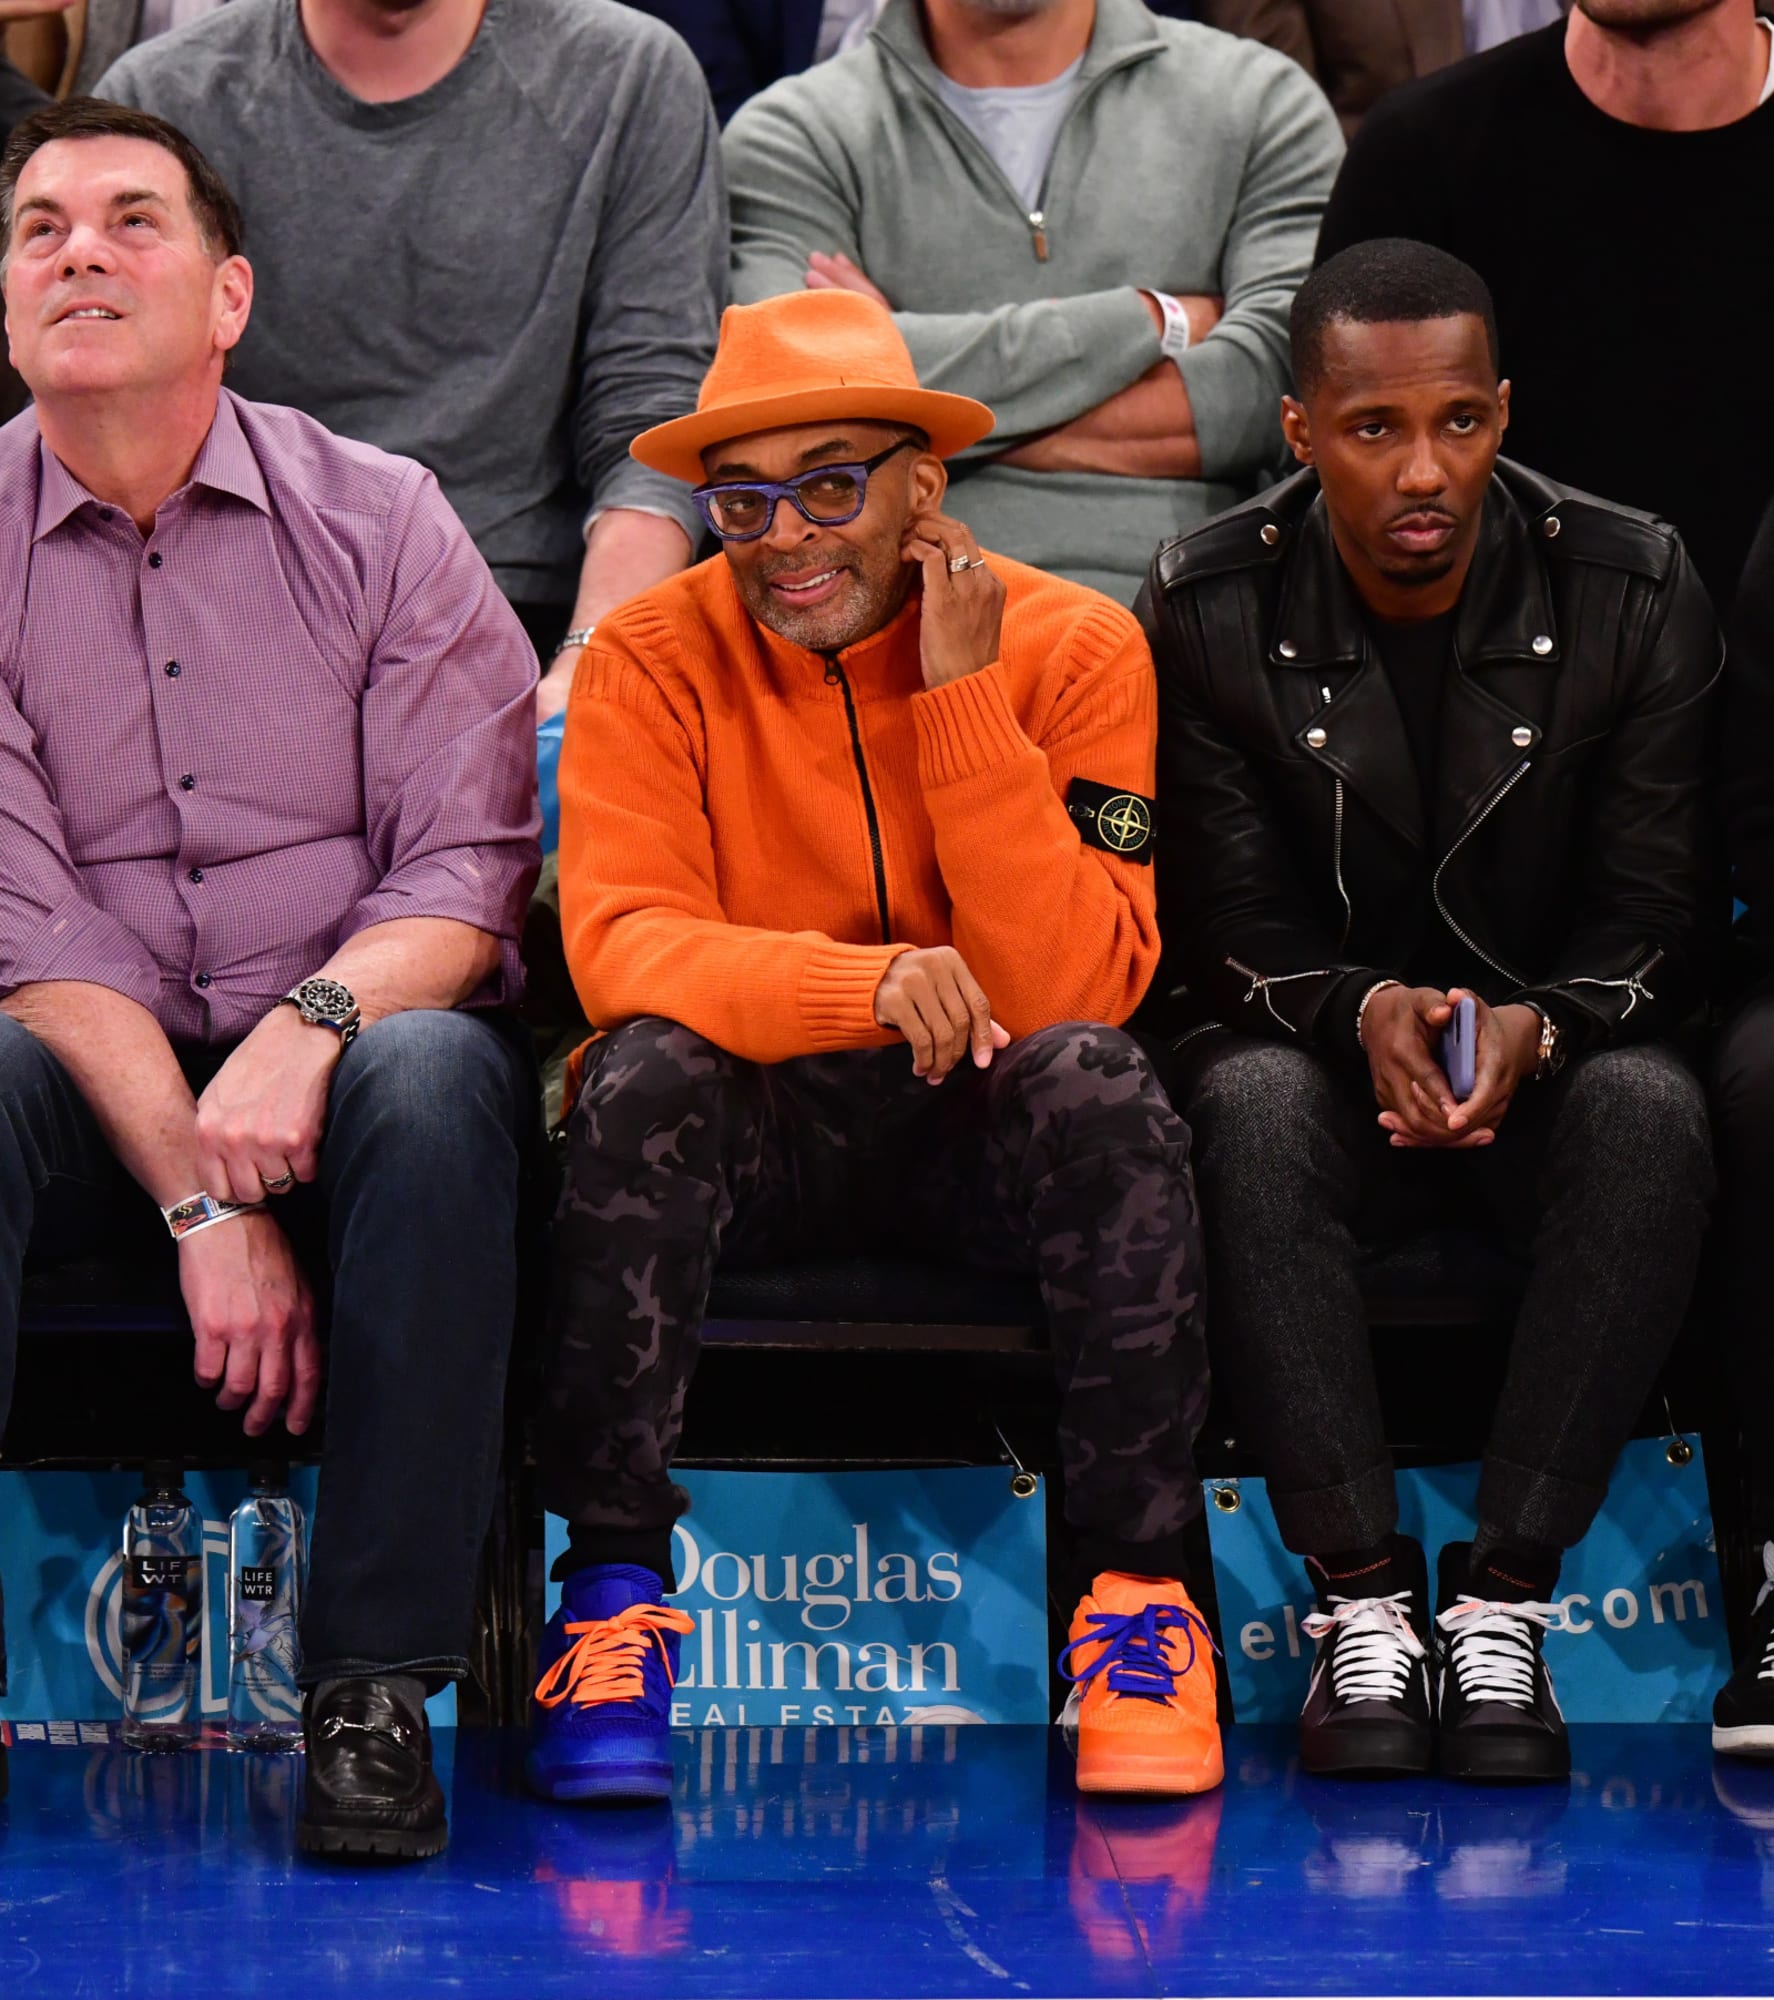 Spike Lee's feud with James Dolan and the Knicks, explained.